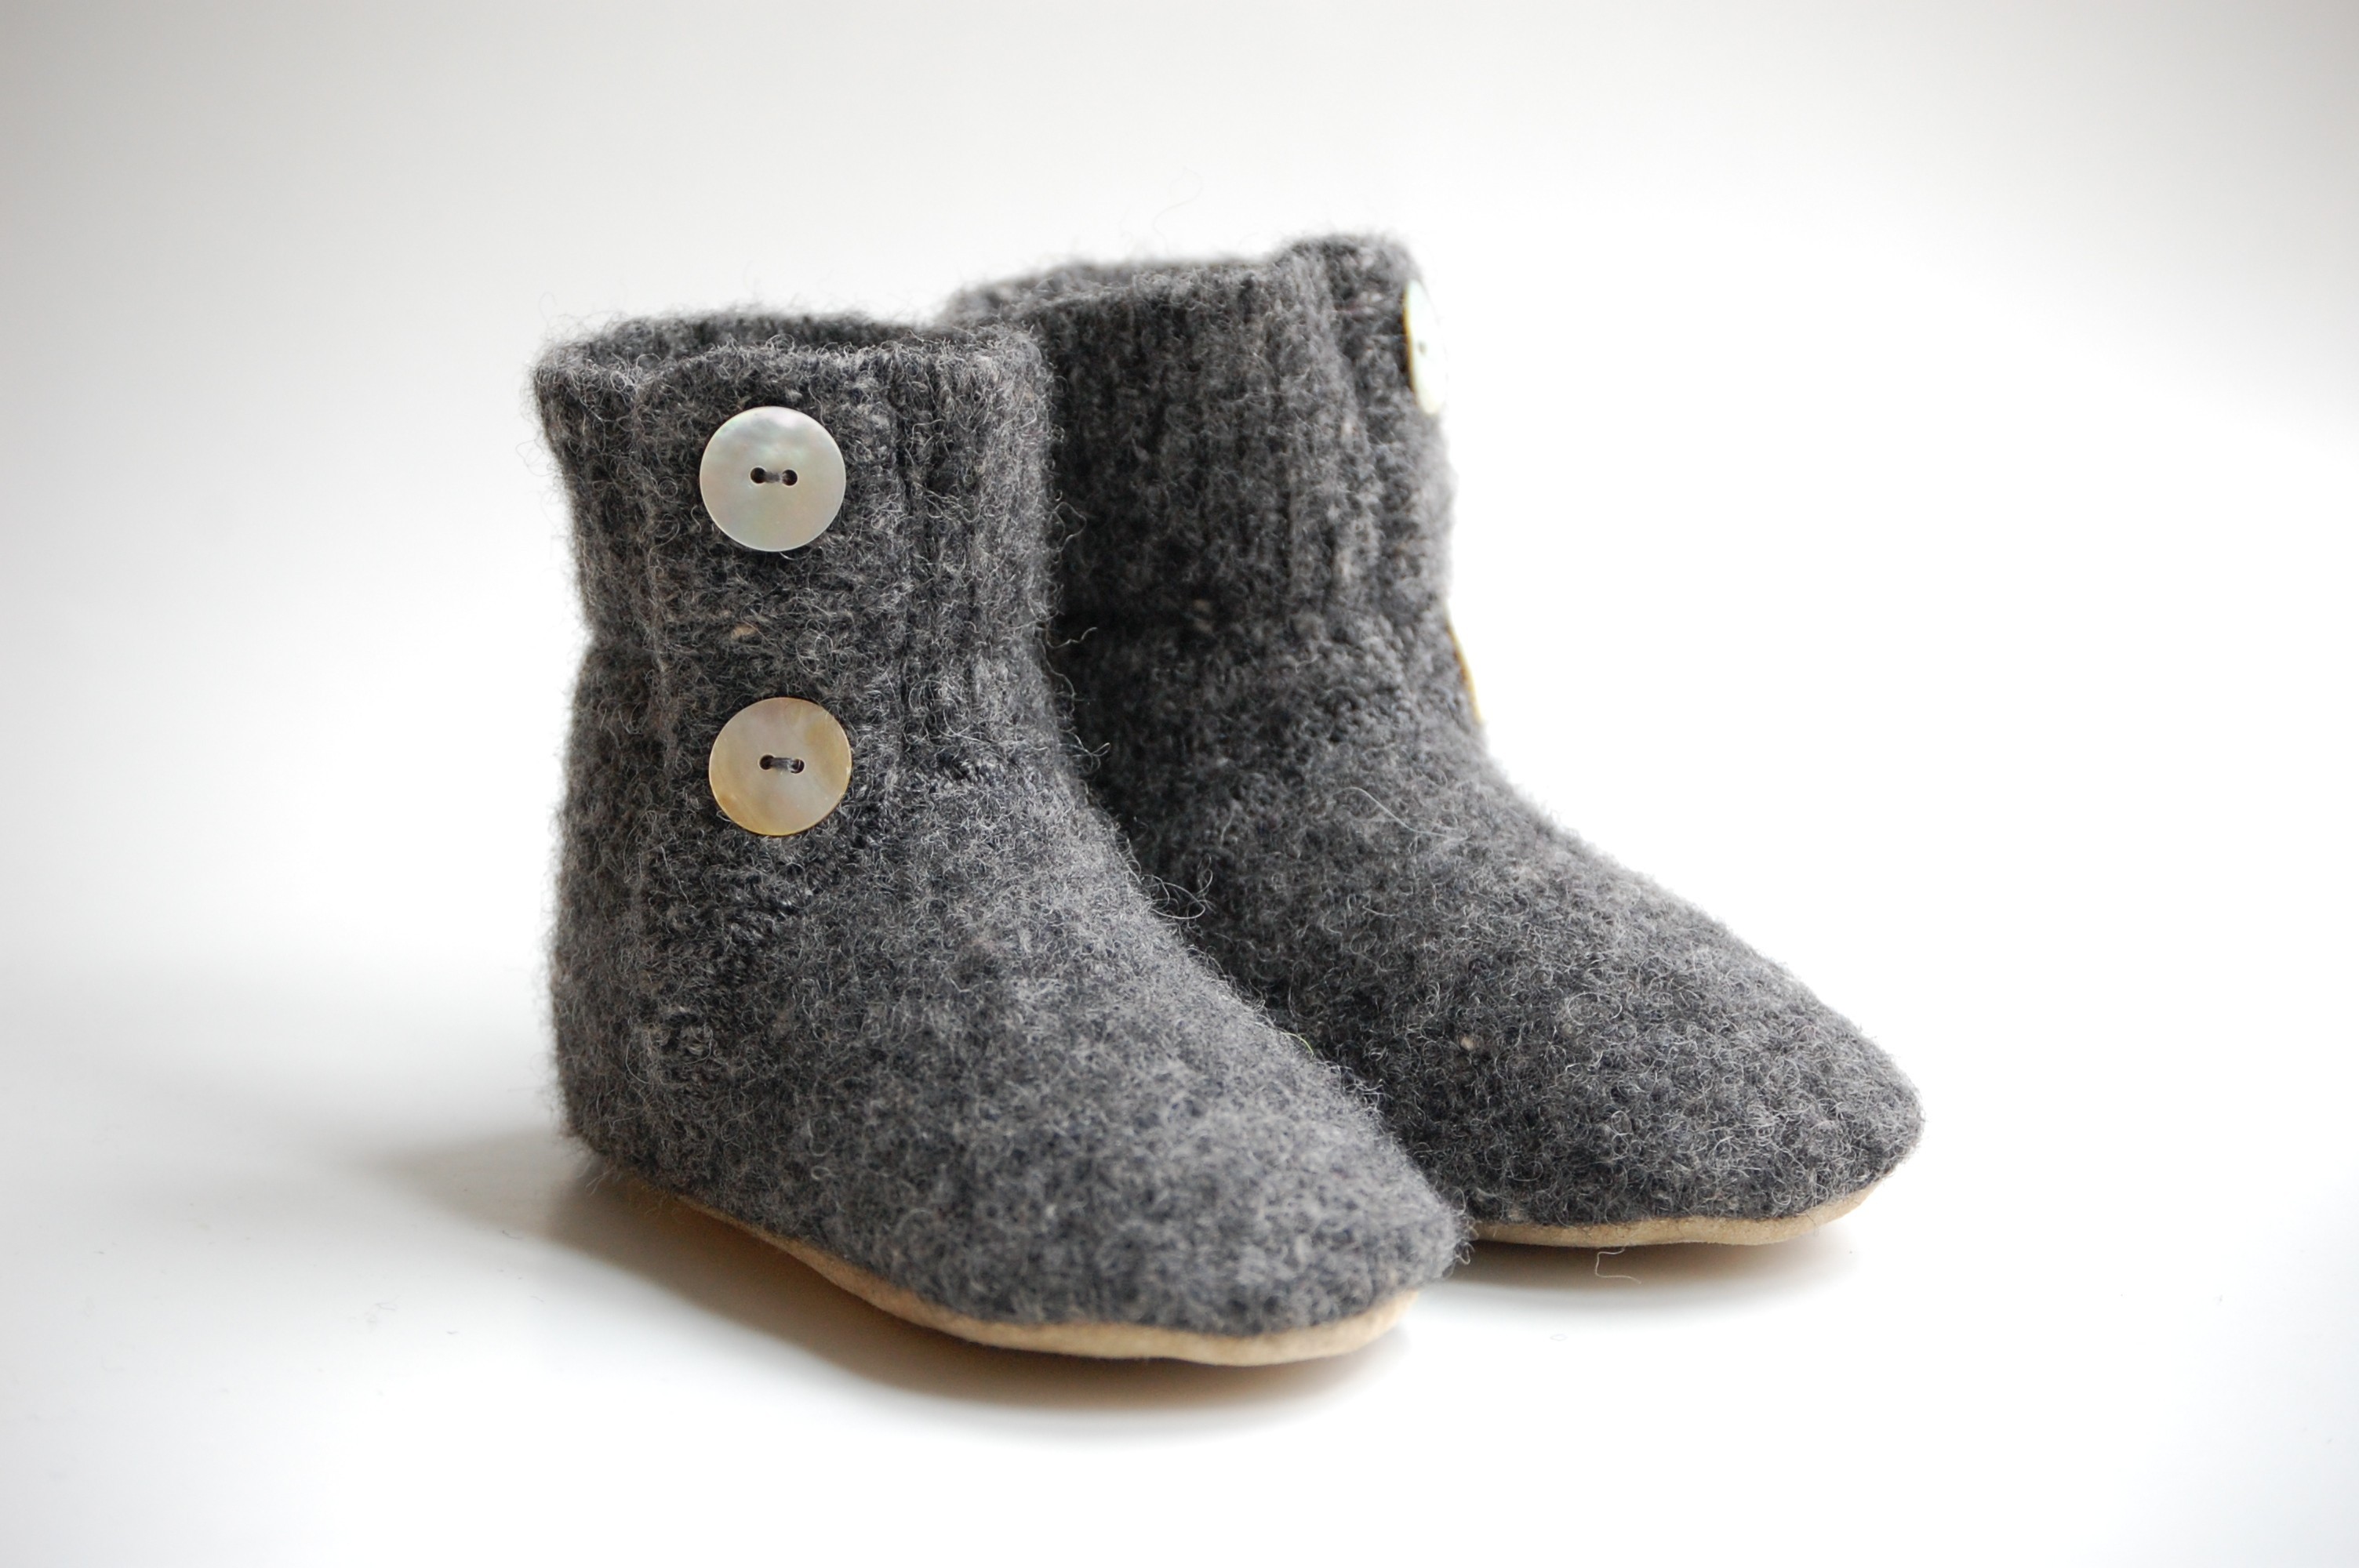 wooly baby, booties, baby, children, footwear, slippers, thelooksee